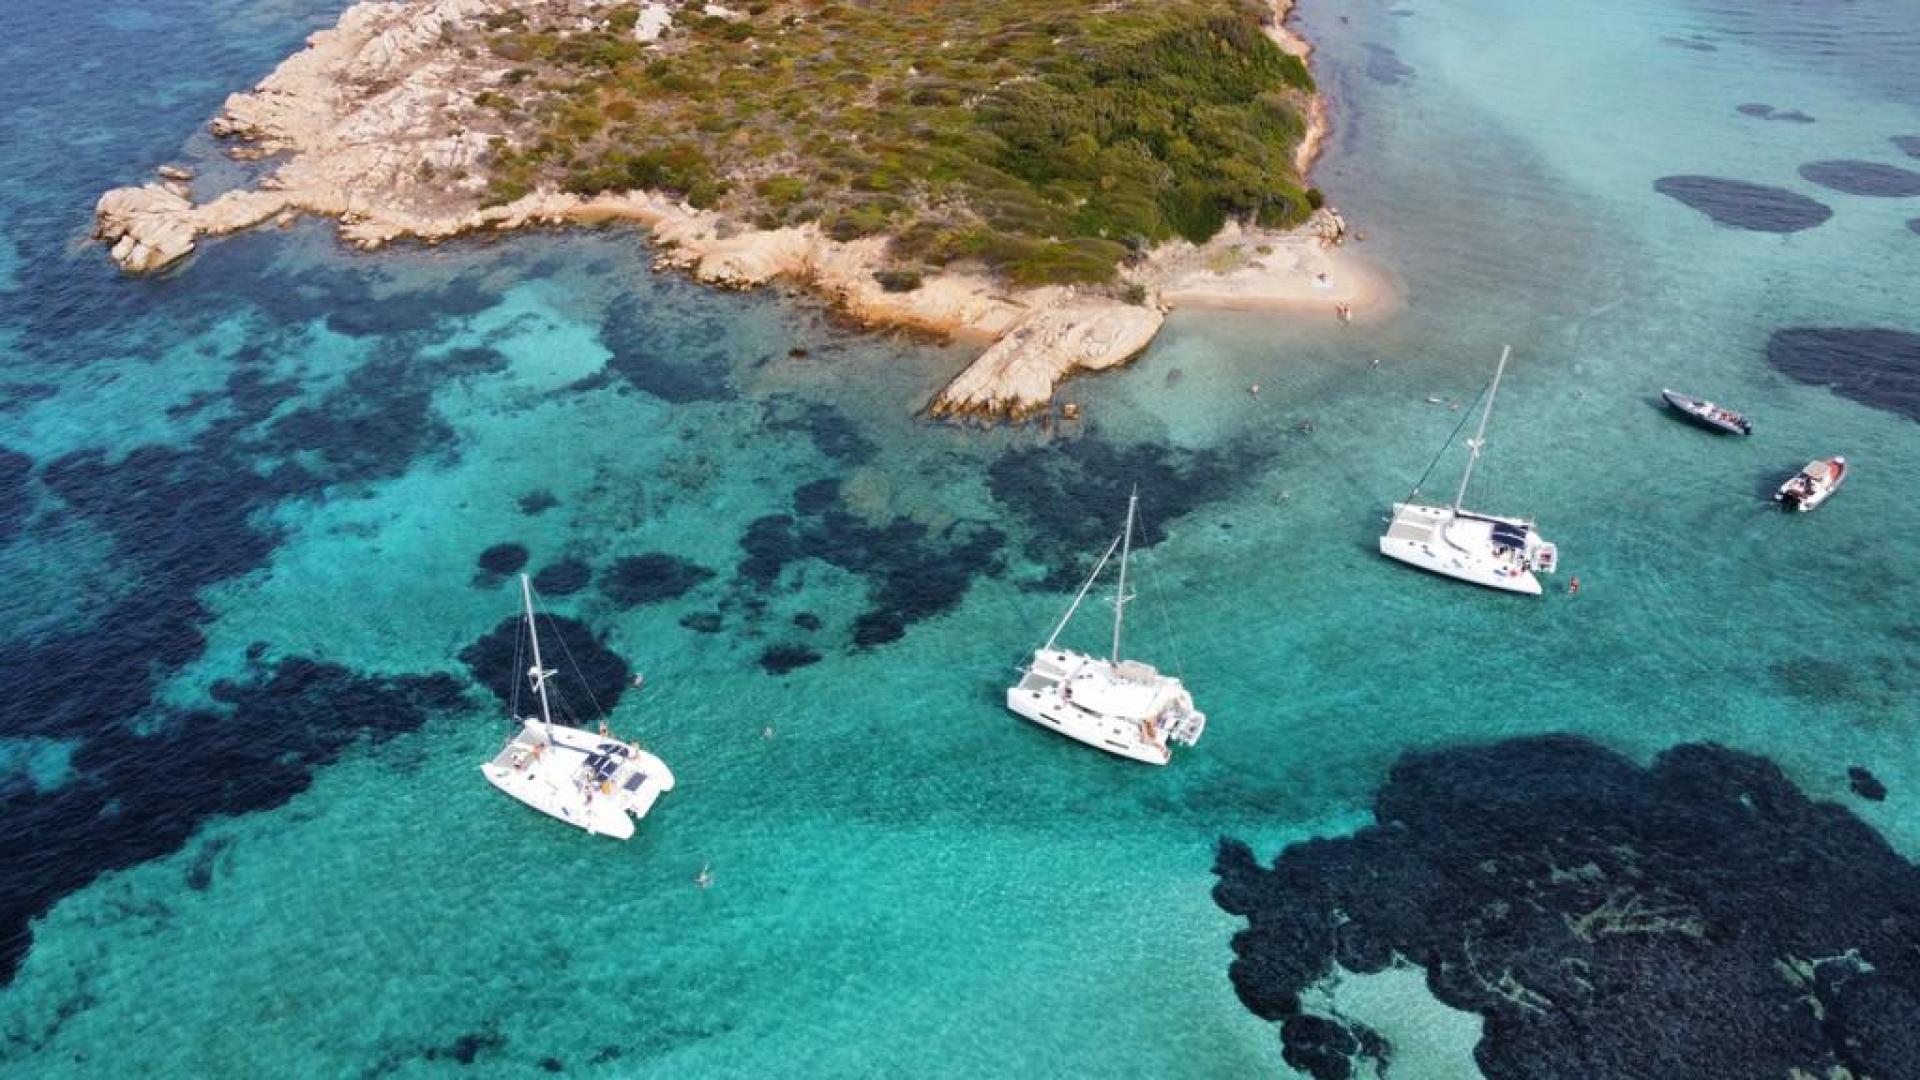 Fountaine Pajot extra luxury catamaran in the crystal clear turquoise waters of La Maddalena